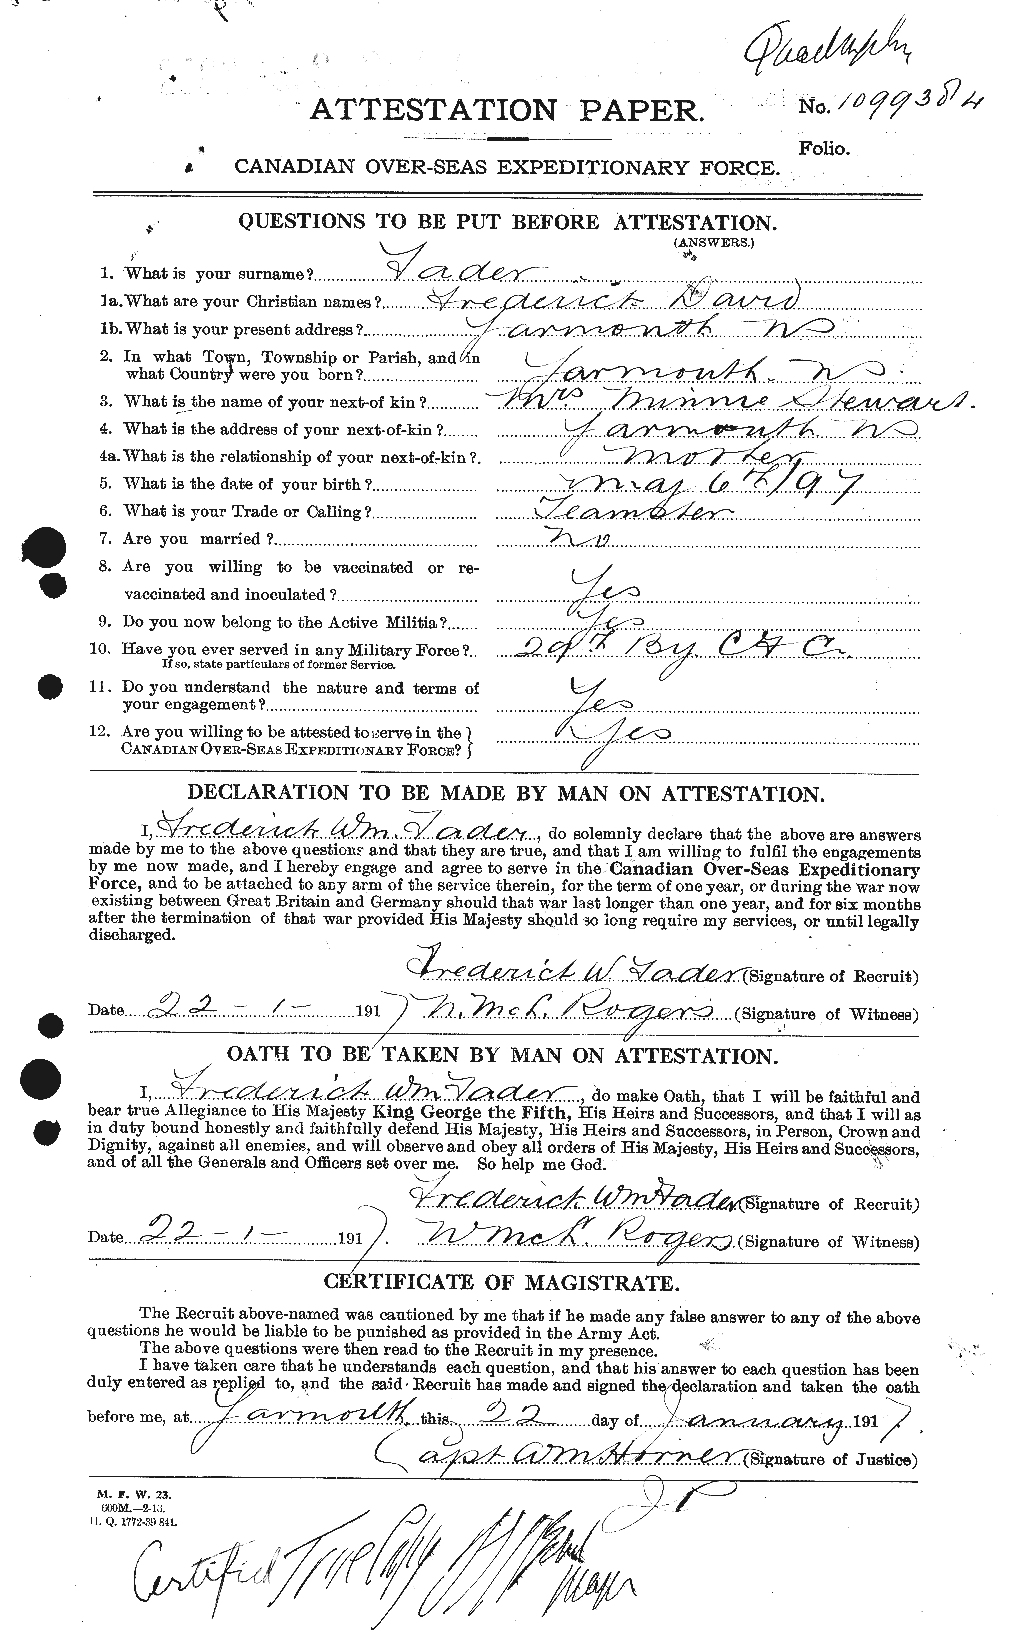 Personnel Records of the First World War - CEF 318177a